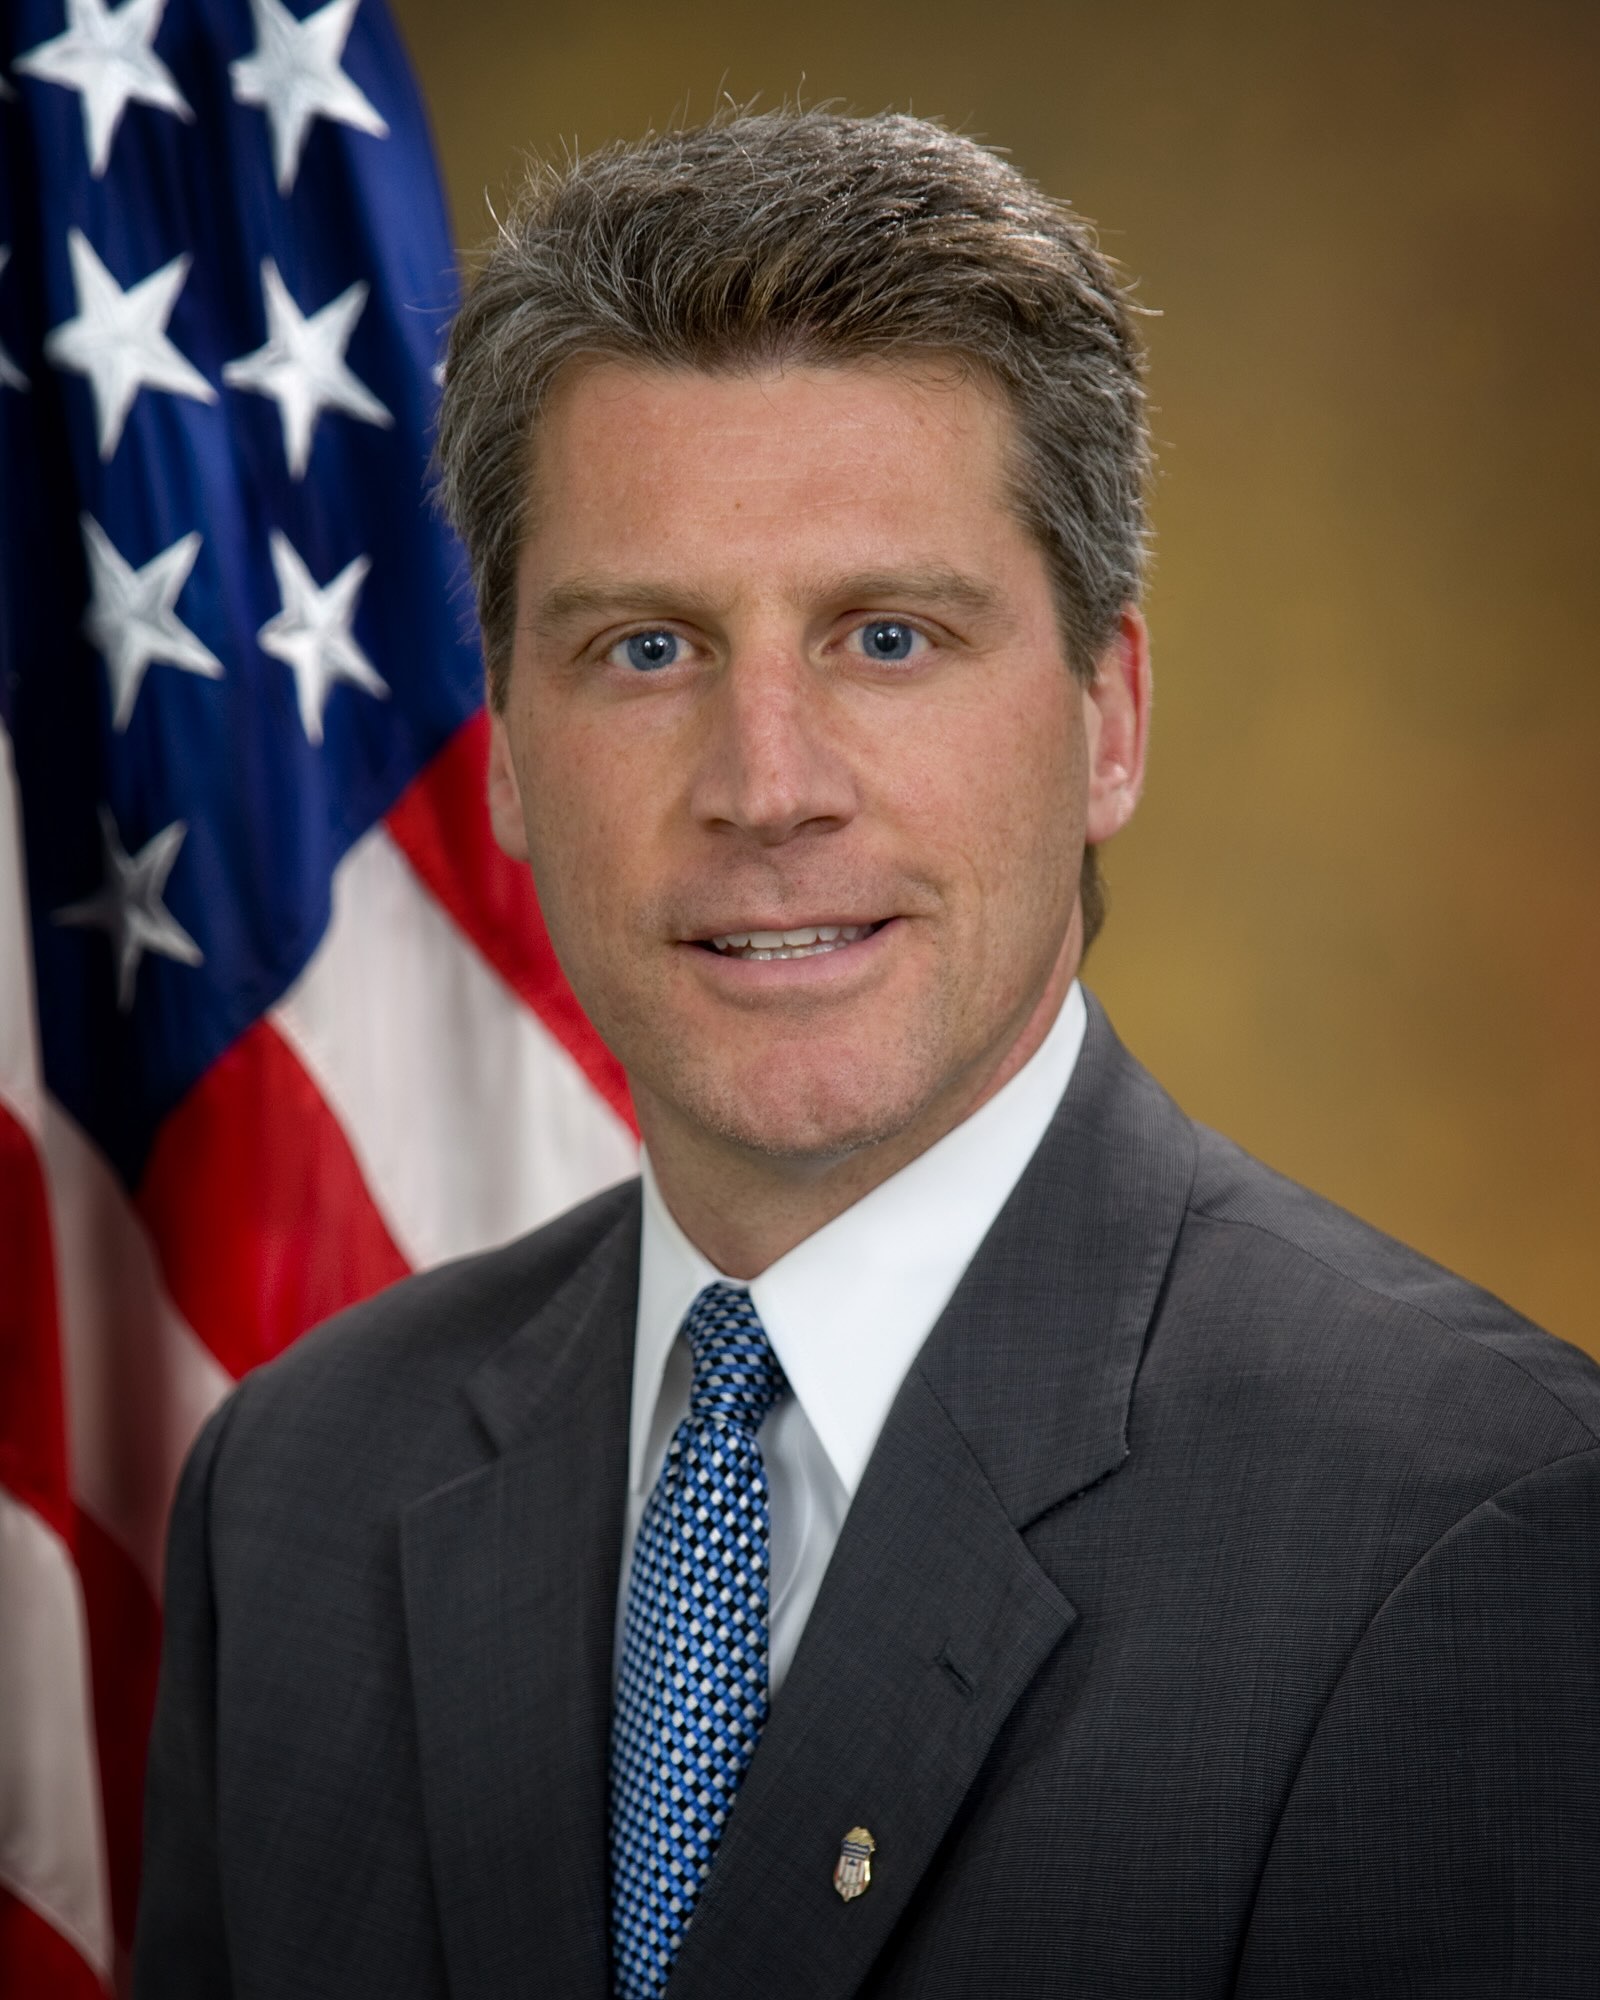 Official portrait of former US attorney Tim Heaphy in suit and tie standing in front of a US flag.